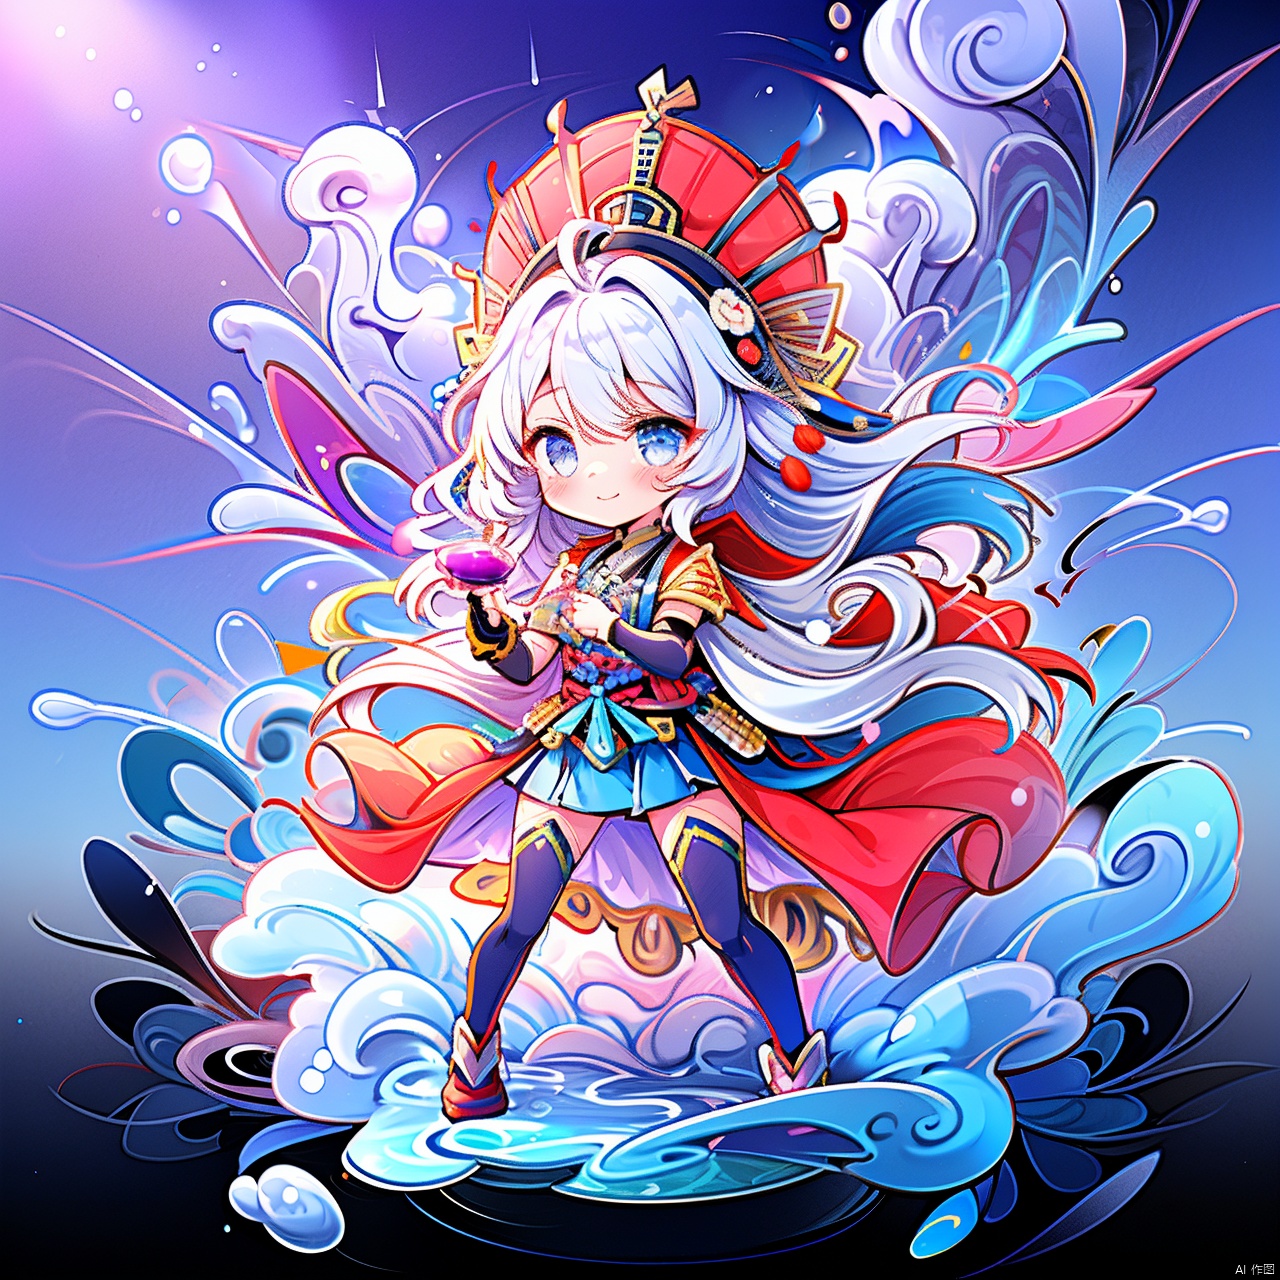  masterpiece, best quality, backlight,3dstely,Chineseclothes,chibi,composition, spiral composition,fbk,anthropomorphic, cute, {owl's head},owl ,one_girl,sword,Cup, warrior,godness of war, Cuiyu Armor,Shang Dynasty,dofas,GBH,sprinkle water,qgirl,raise your head and keep your chest straight,arrogant,{combat}, {armor}, bronze, serious, looking up, Action games,Combat posture,A sword at his waist,{jump},{A huge wine jug},a dragon, HTTP, qgirl,{Armor}, {Metal wrist brace},fighting_stance,general, bartending